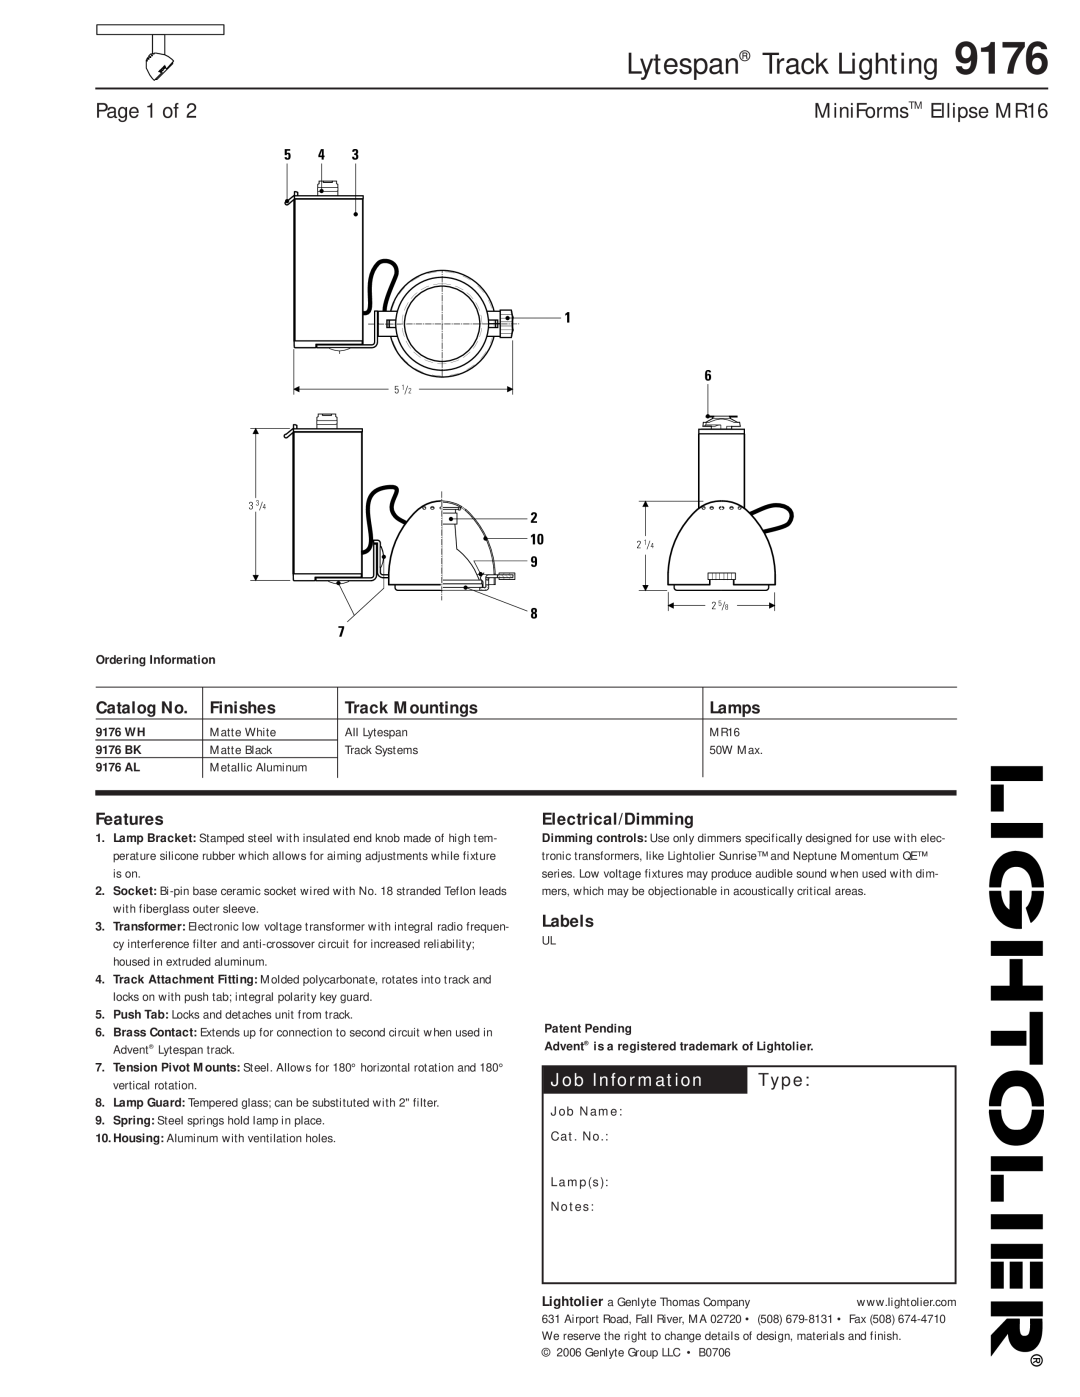 Lightolier 9176 manual Page 1 of, MiniFormsTM Ellipse MR16, Finishes, Track Mountings, Lamps, Features, Electrical/Dimming 